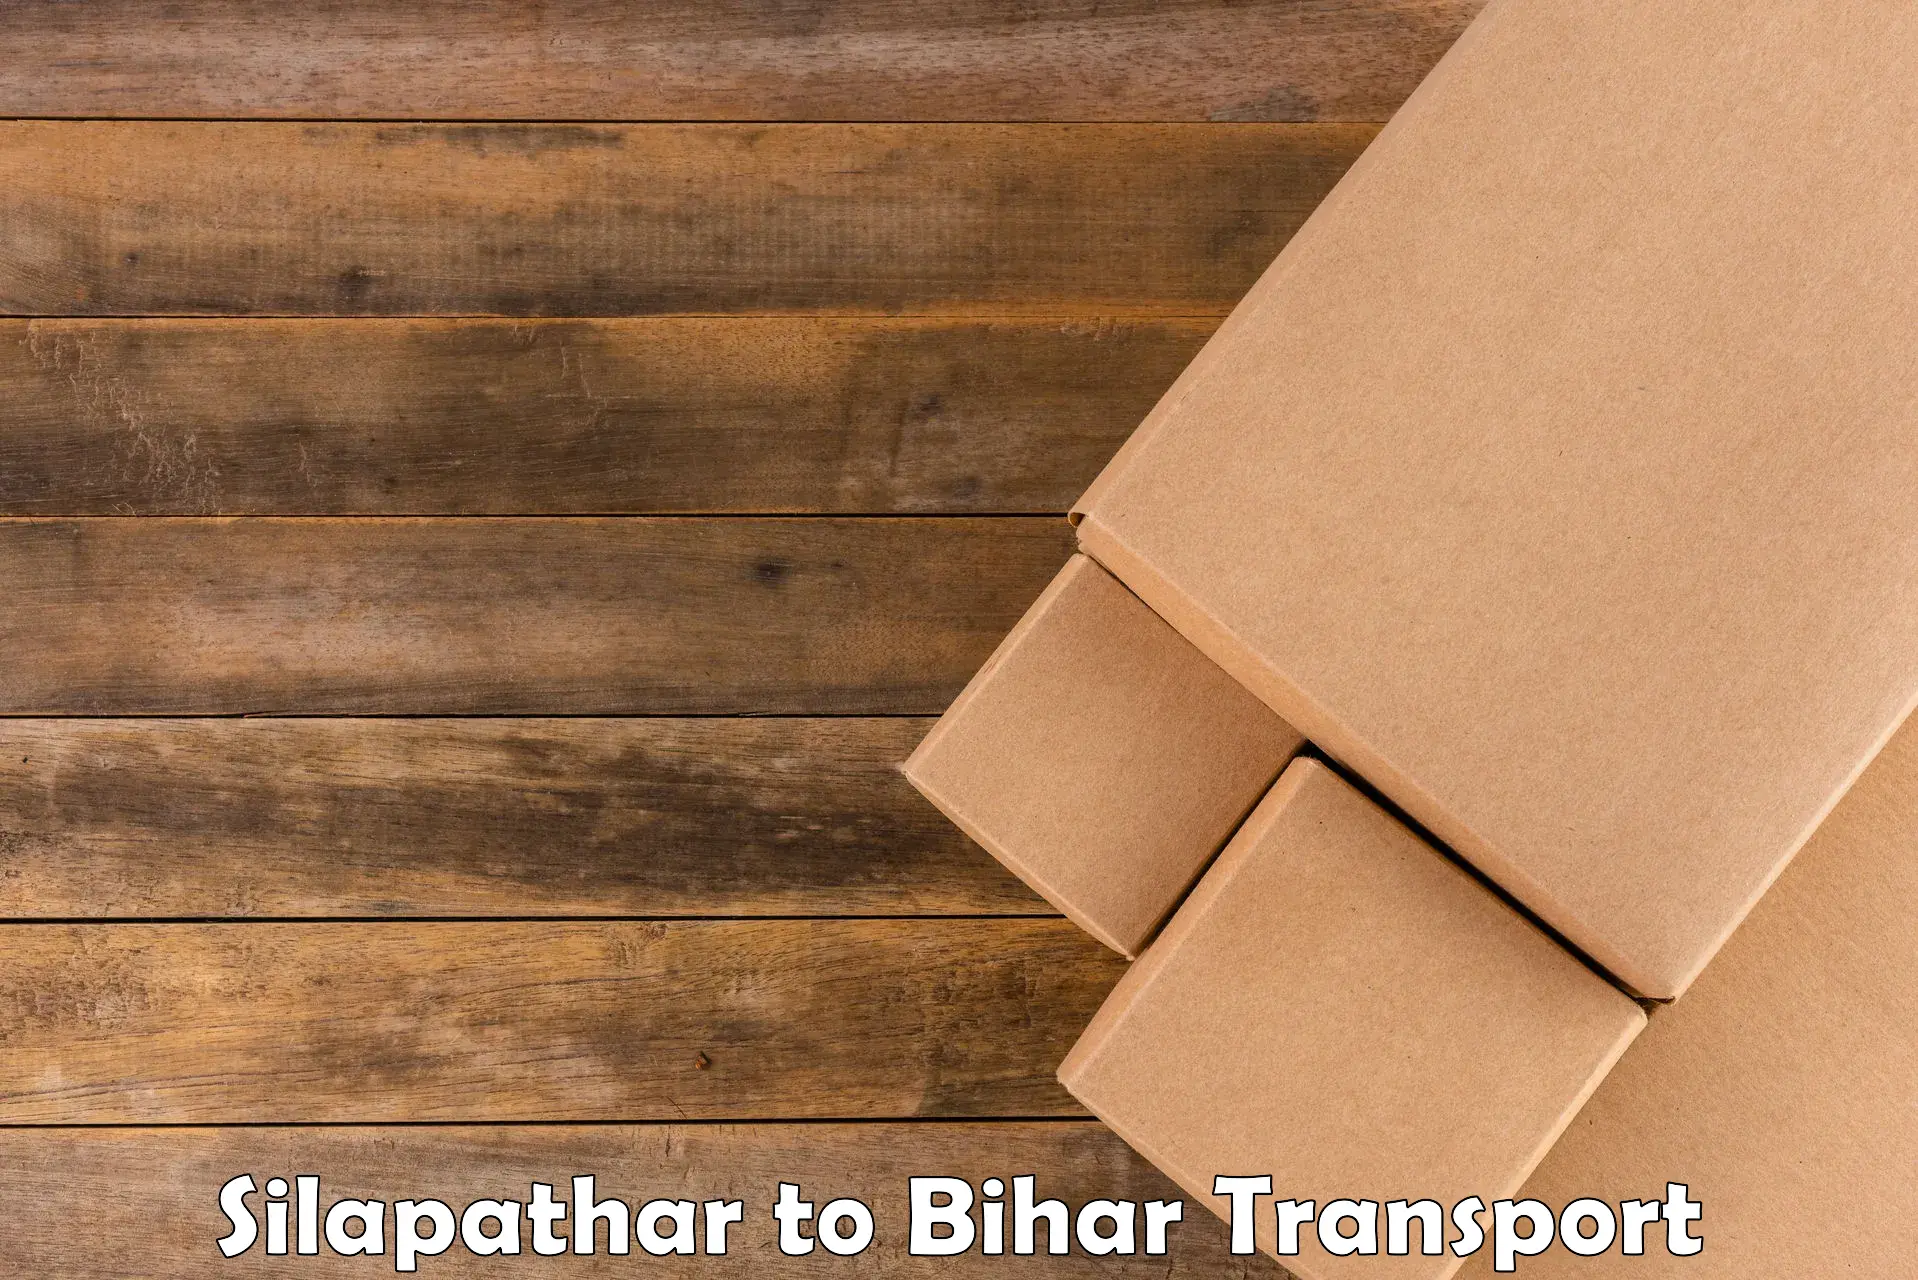 Domestic goods transportation services Silapathar to Mohammadpur